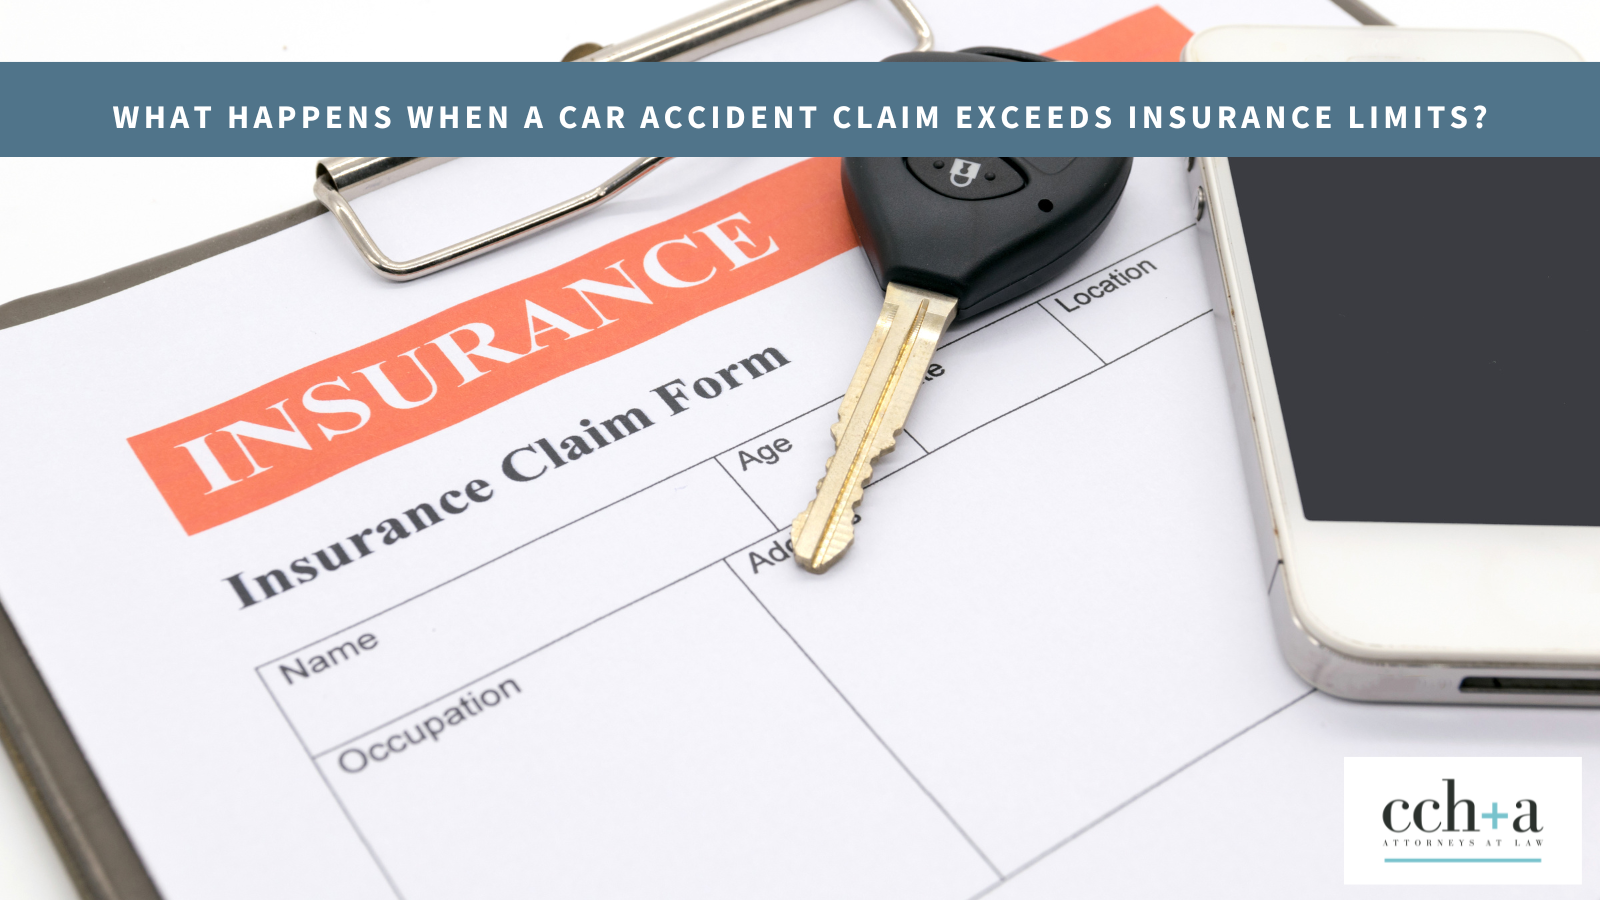 CCHA What Happens When a Car Accident Claim Exceeds Insurance Limits blog post